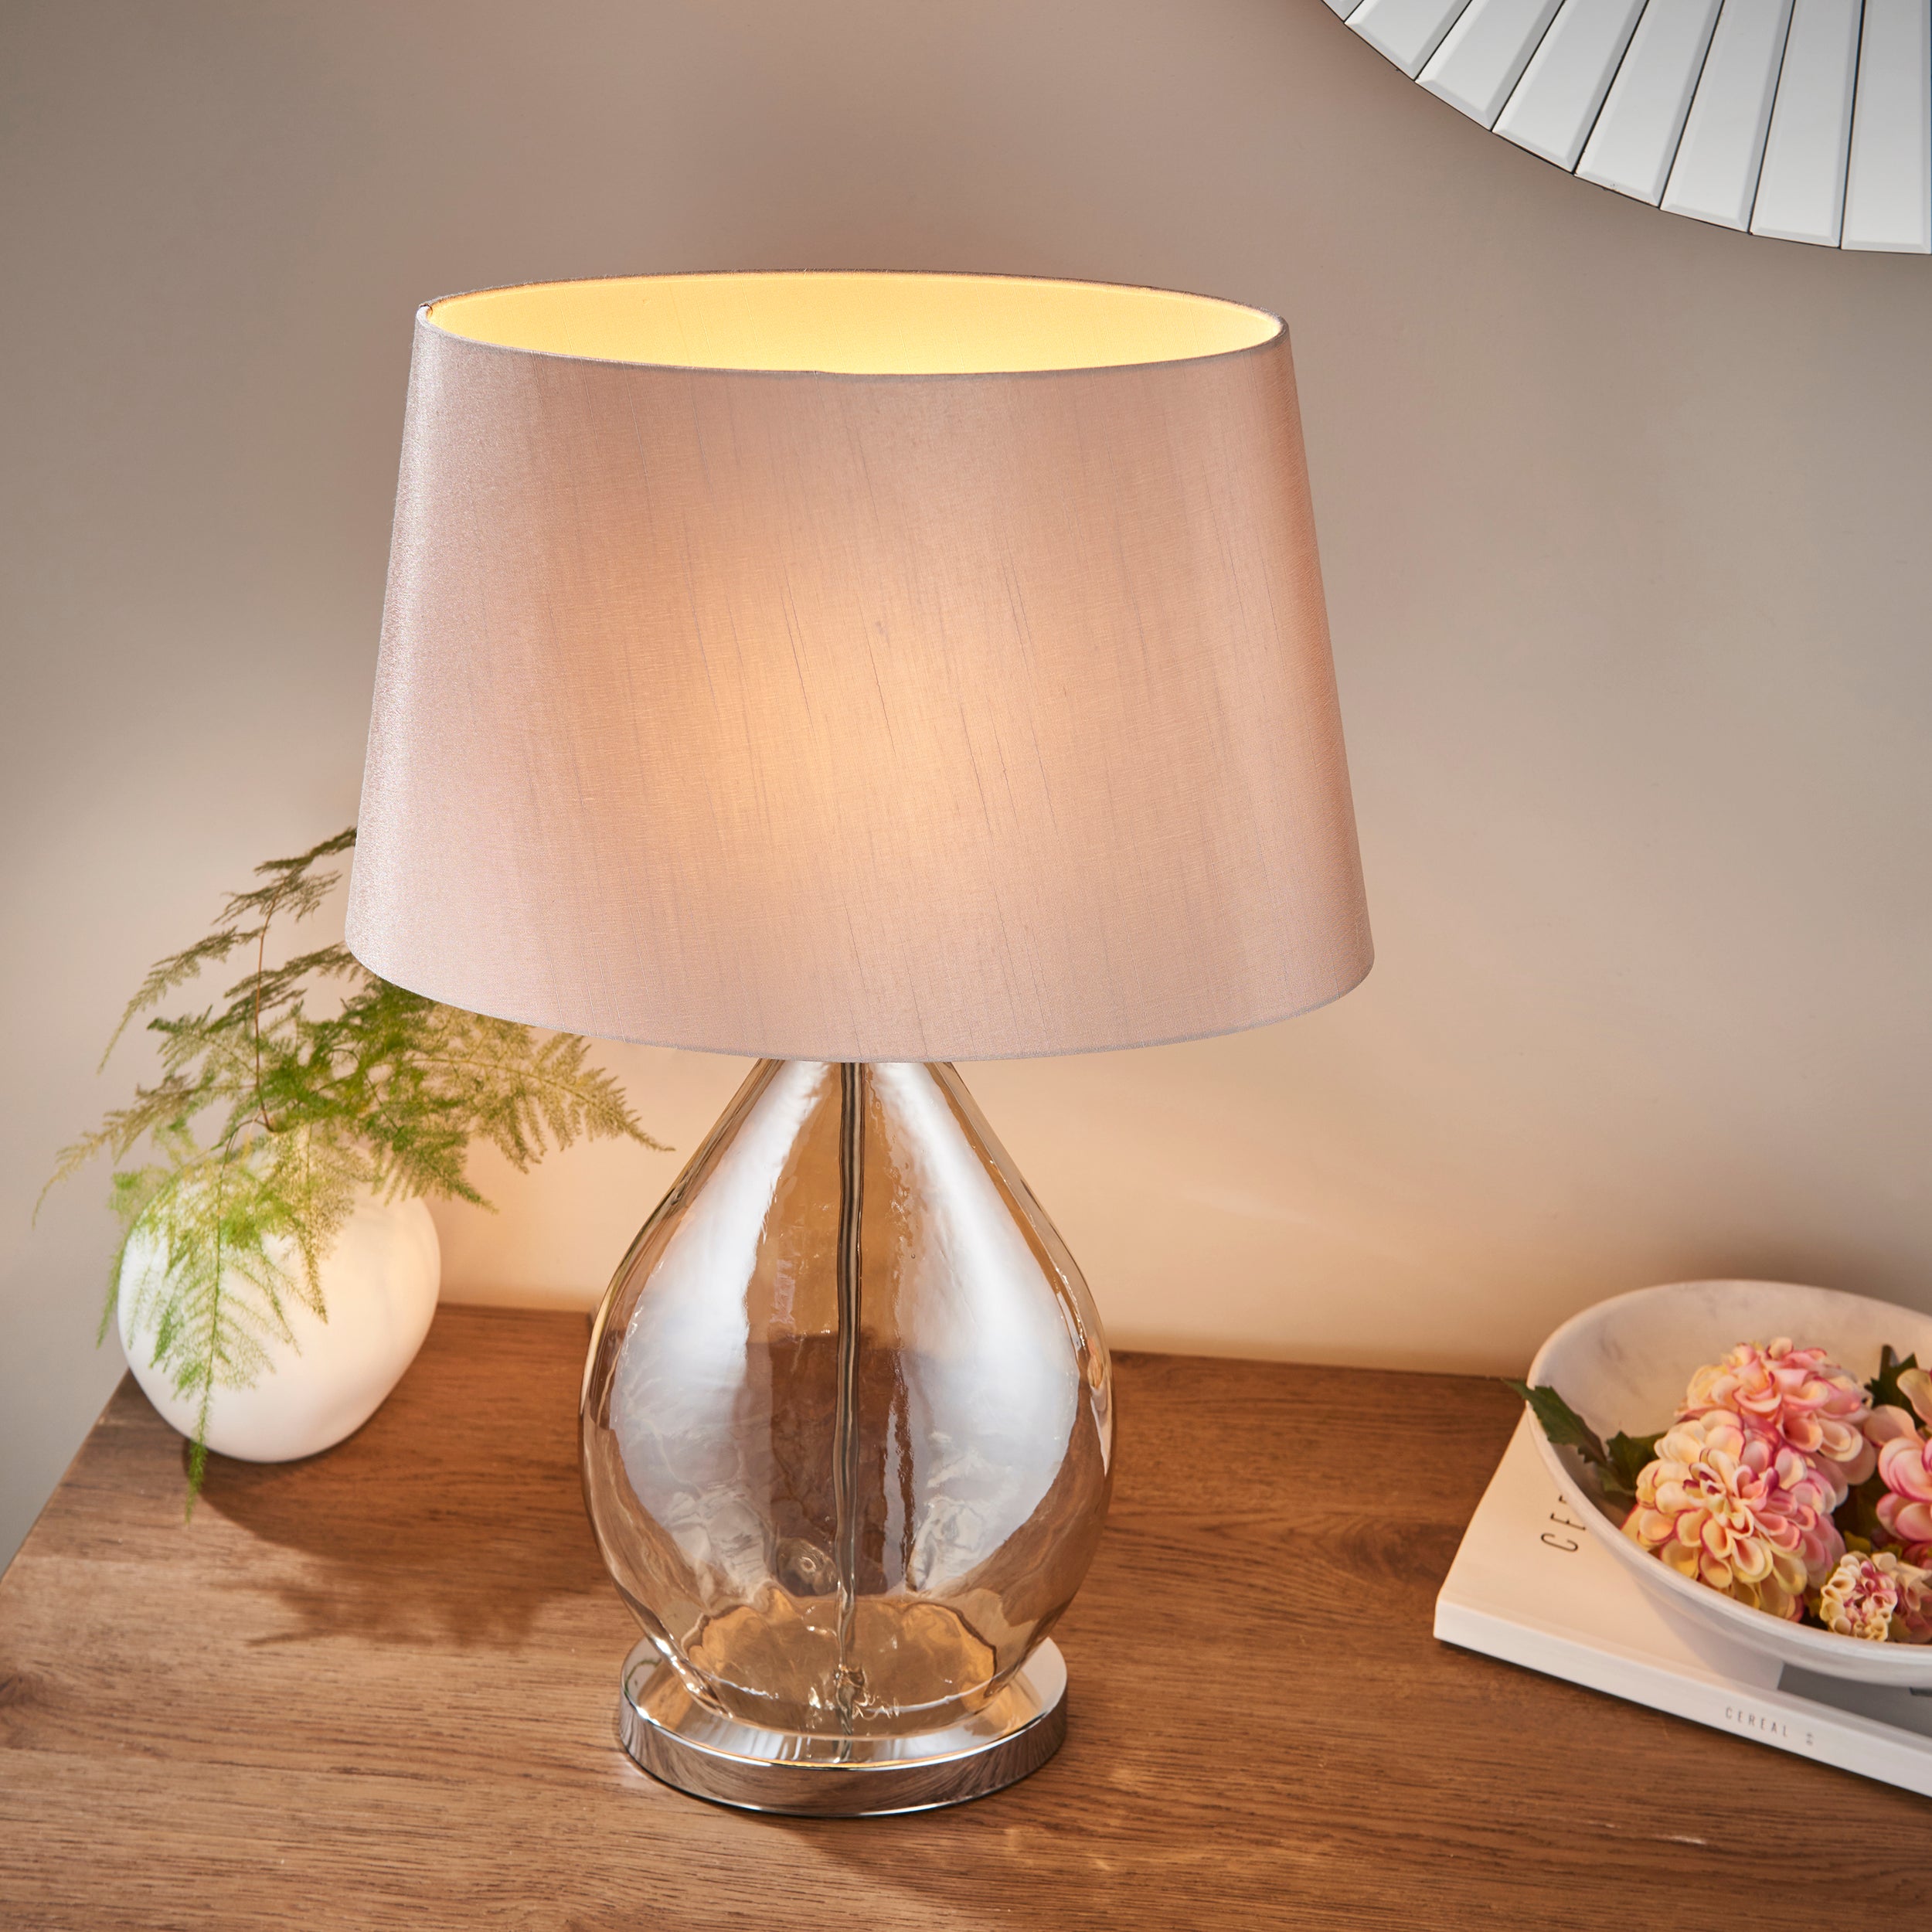 How Do You Choose The Perfect Table Lamp For Your Home?